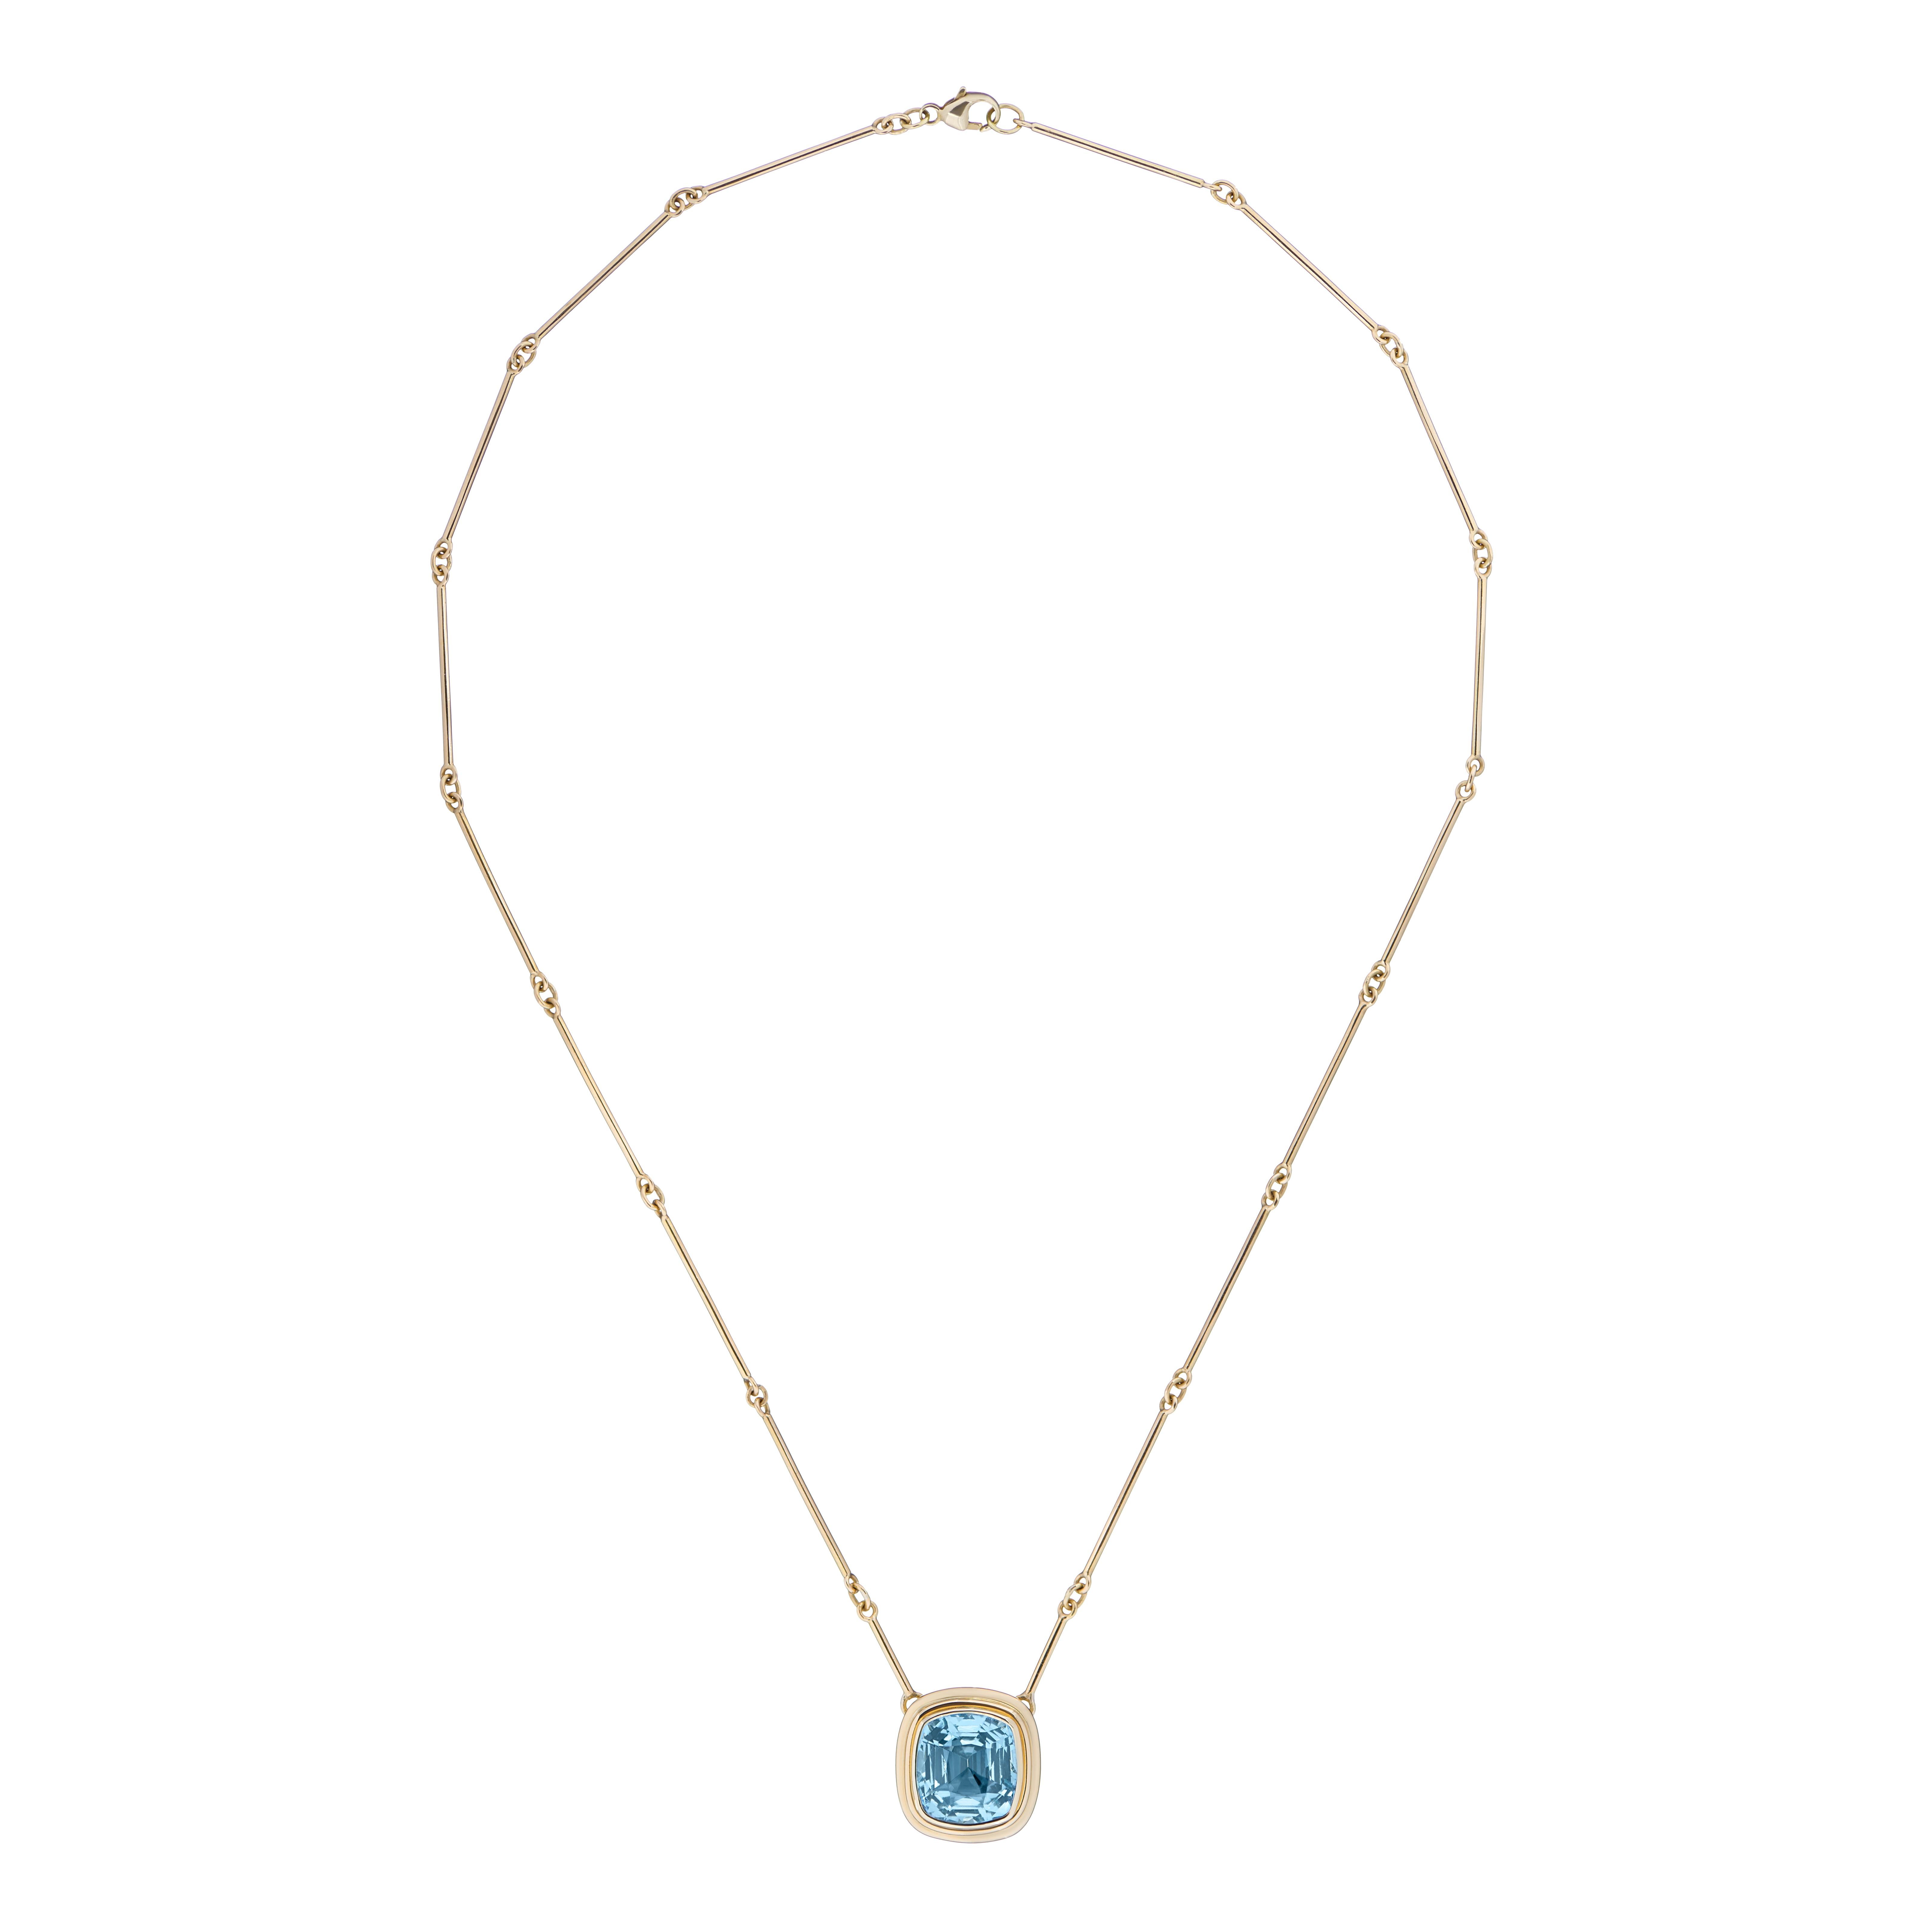 A top quality certified 6.97 carat cushion cut Aquamarine set in 18 karat yellow gold on an 18 inch gold bar chain. 
This striking statement necklace sets off any outfit. The colour of the Aquamarine is a true blue that really pops.

From the Athena